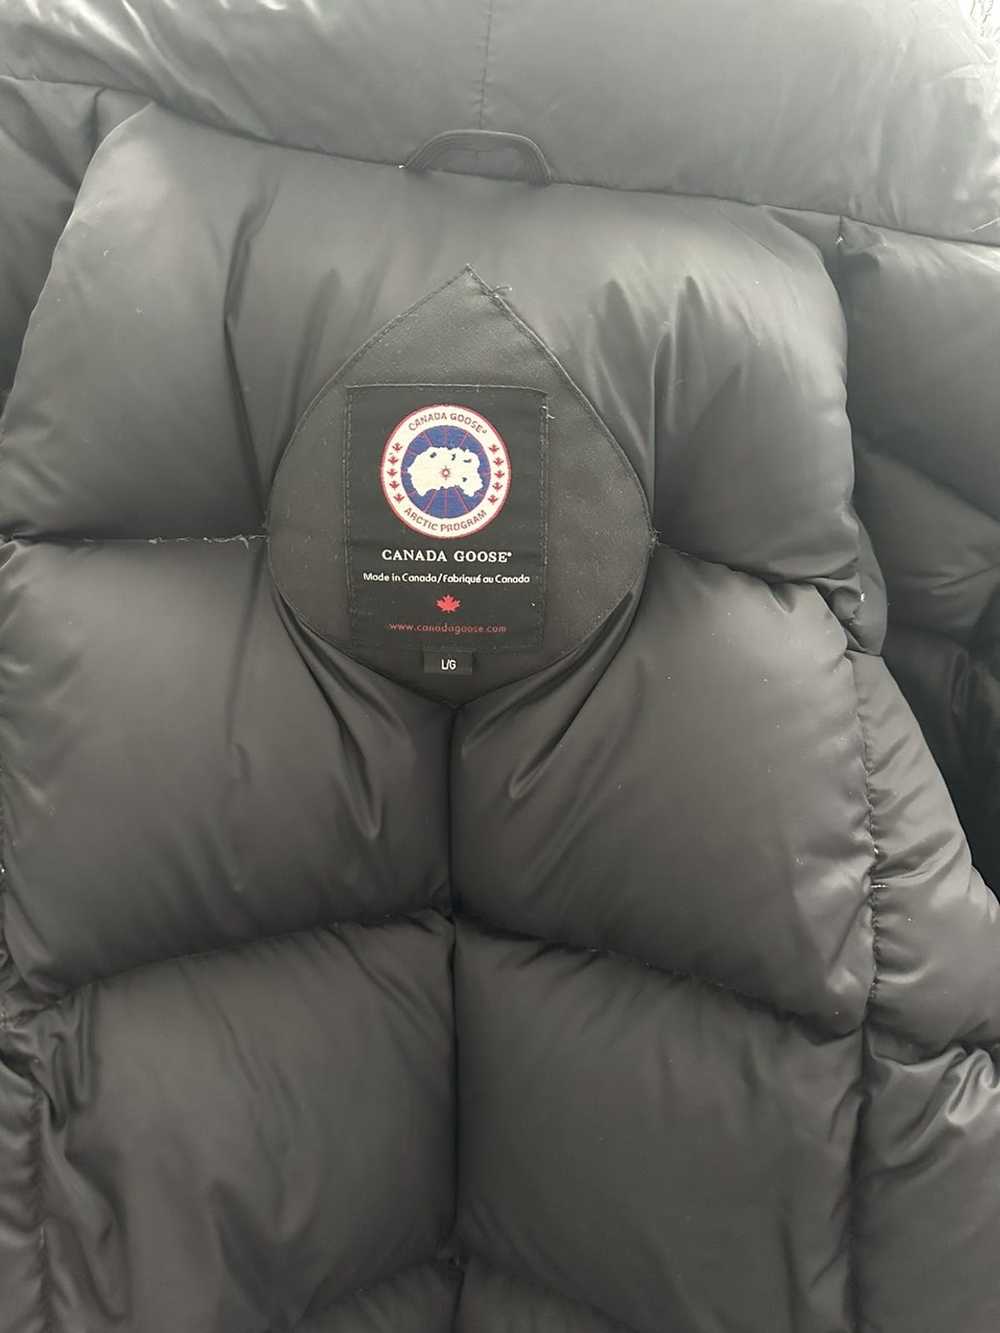 Canada Goose Expedition Parka - image 10